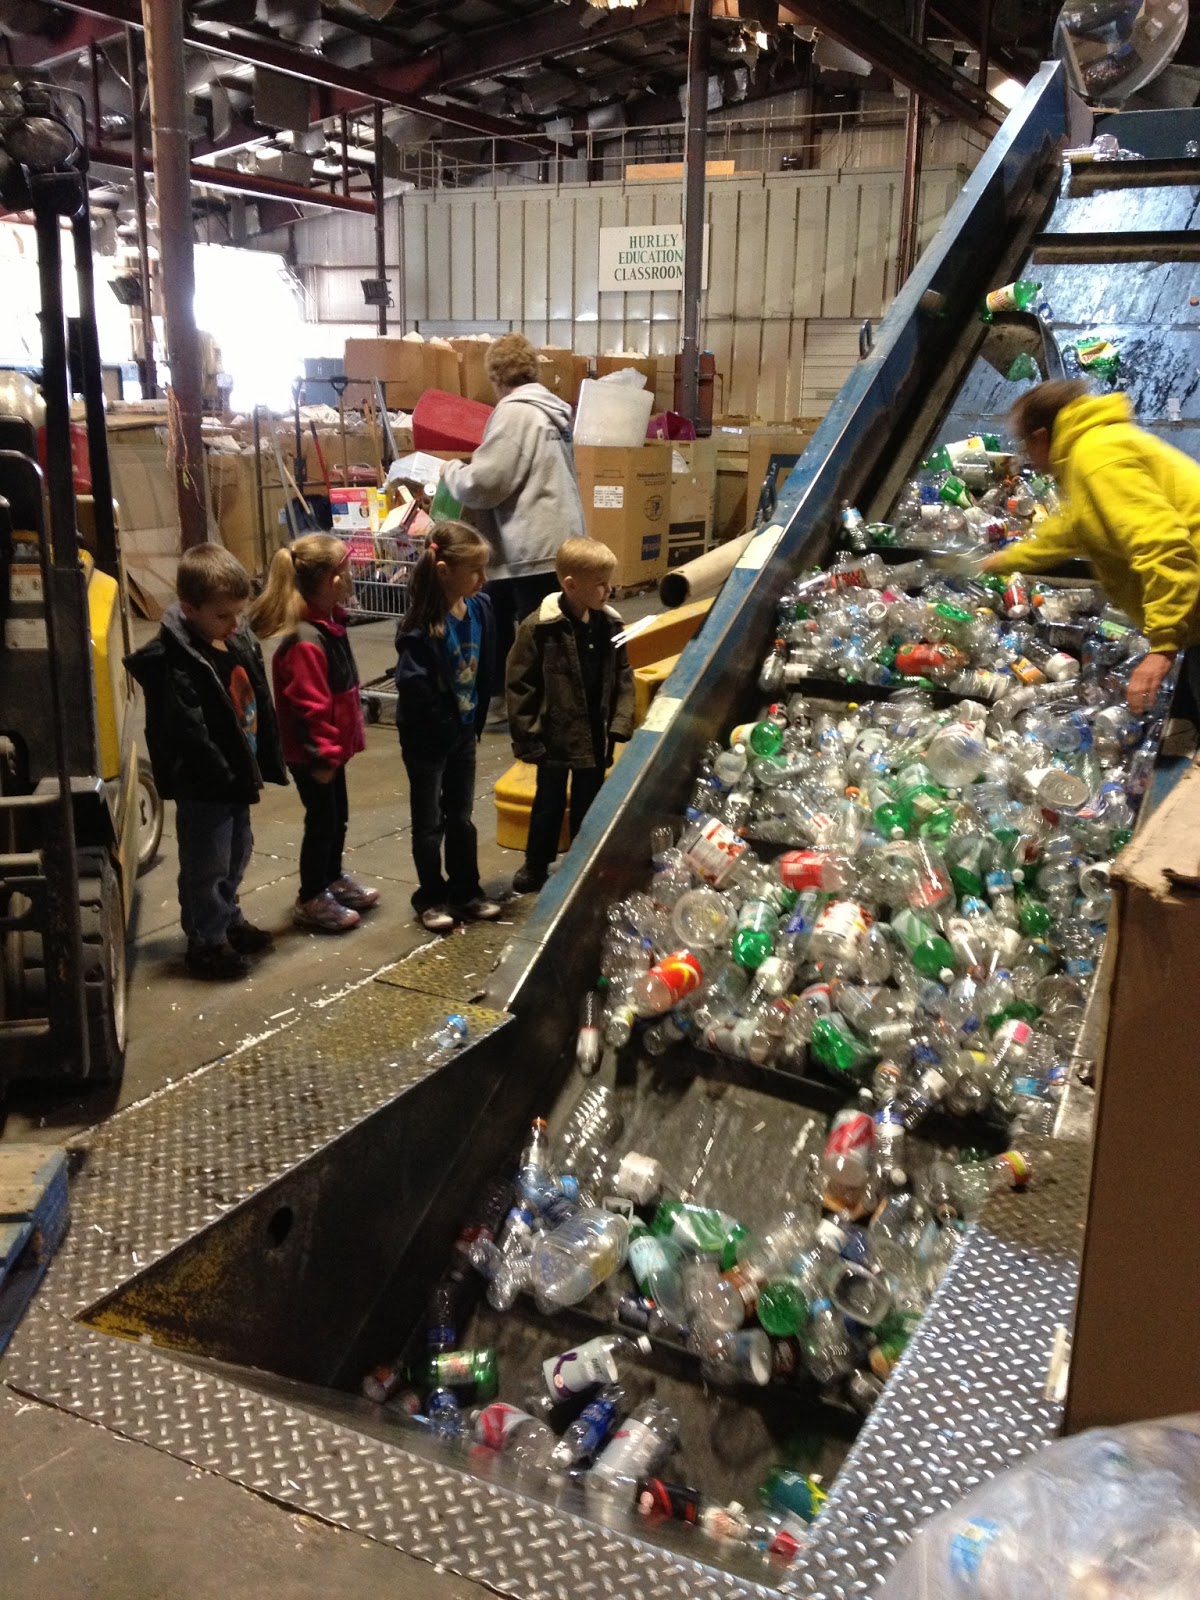 We even got to throw plastic into the machine and watch it get crushed ...